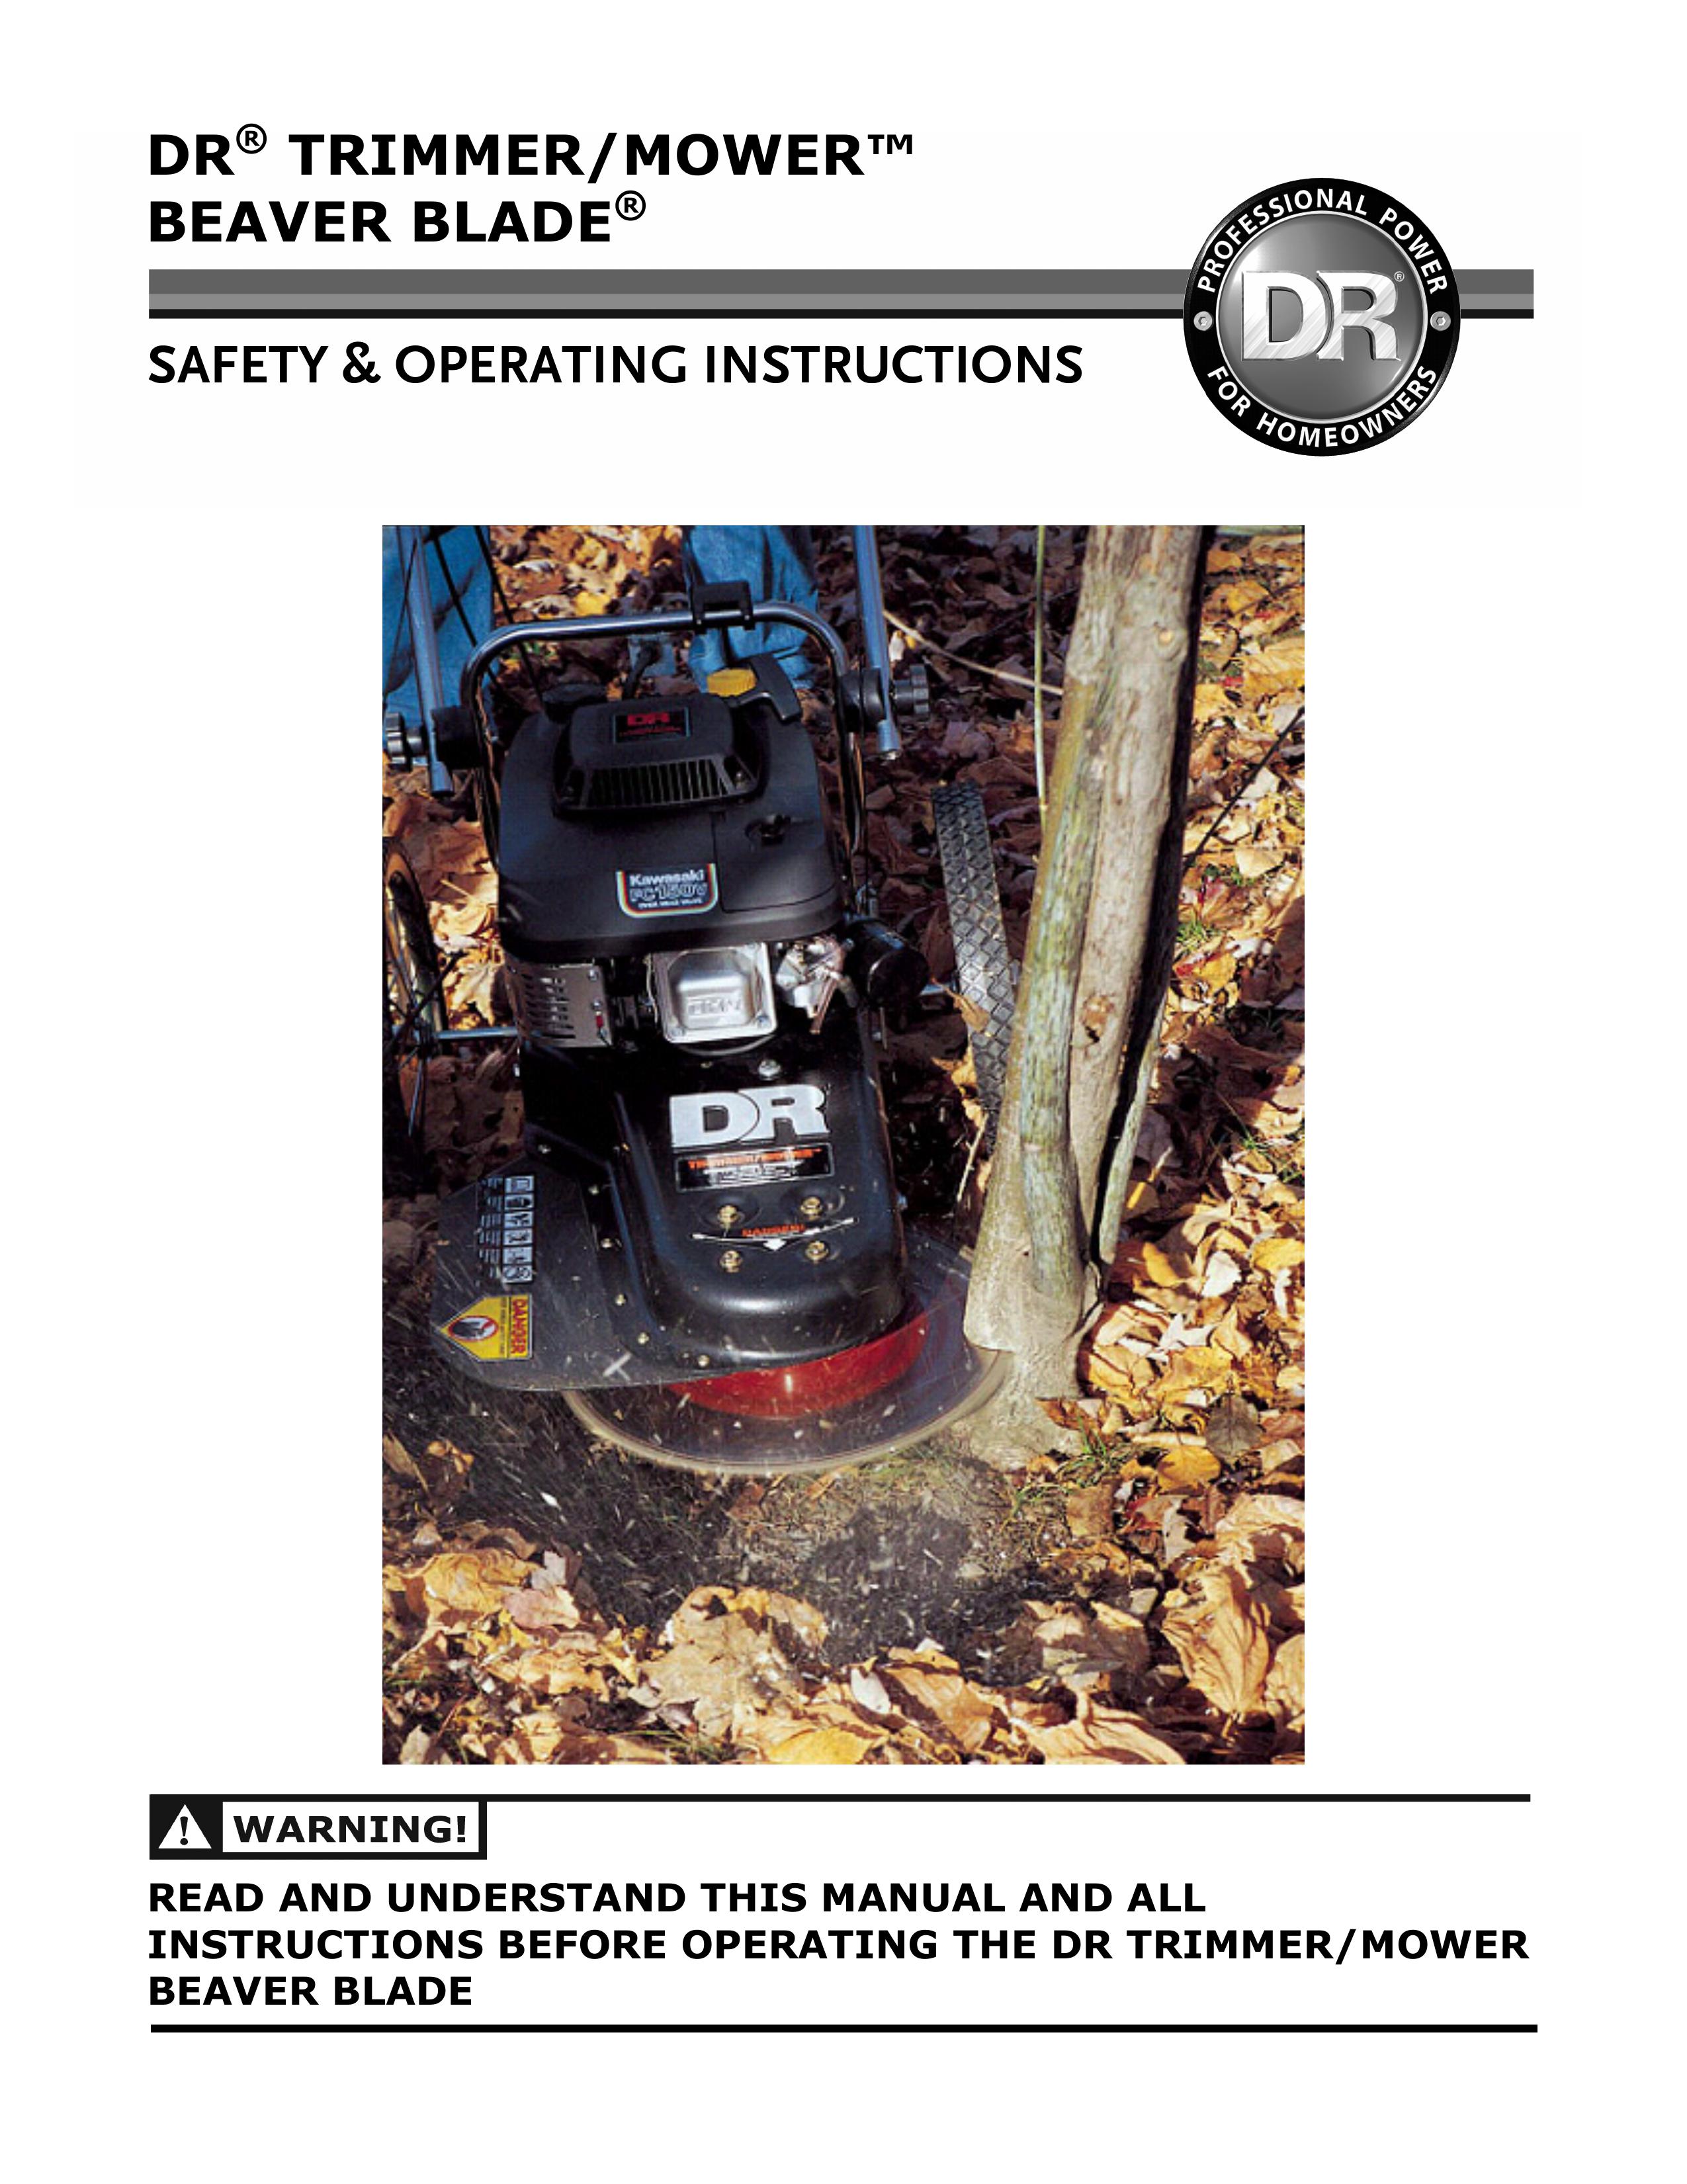 Country Home Products DR TRIMMER/MOWERTM BEAVER BLADE Lawn Mower User Manual